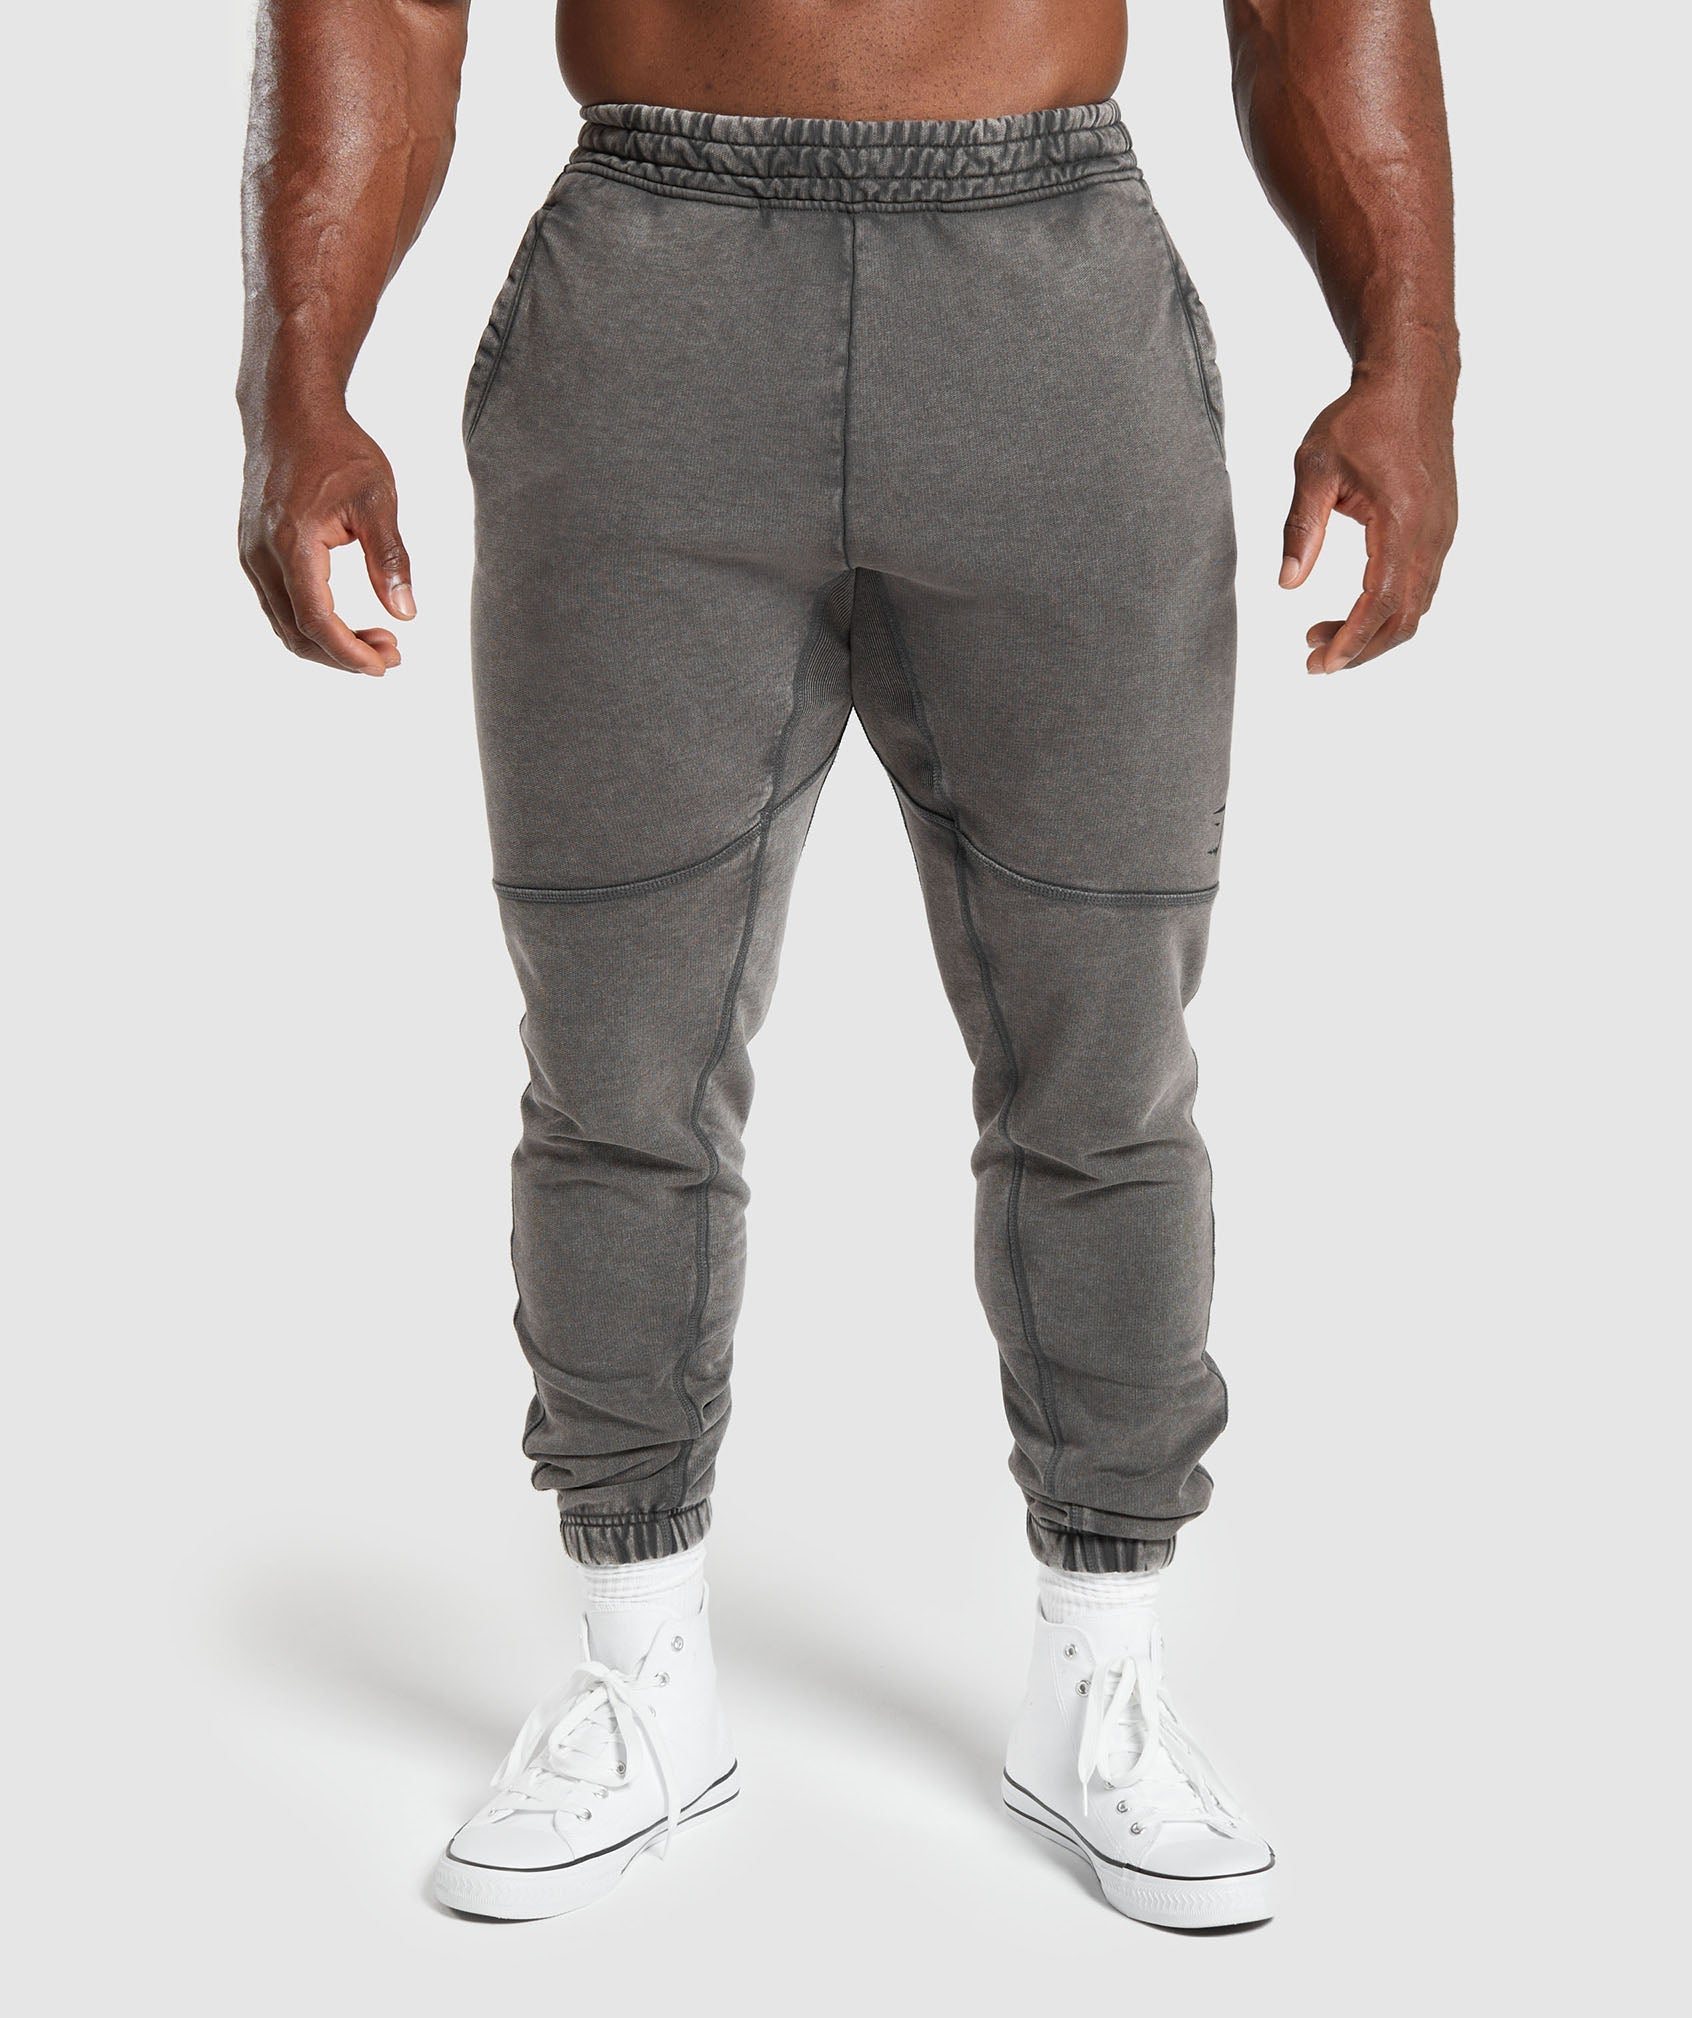 Gymshark - Cargo Bottoms - Wolf Grey - Size L - BRAND NEW IN PACKAGING